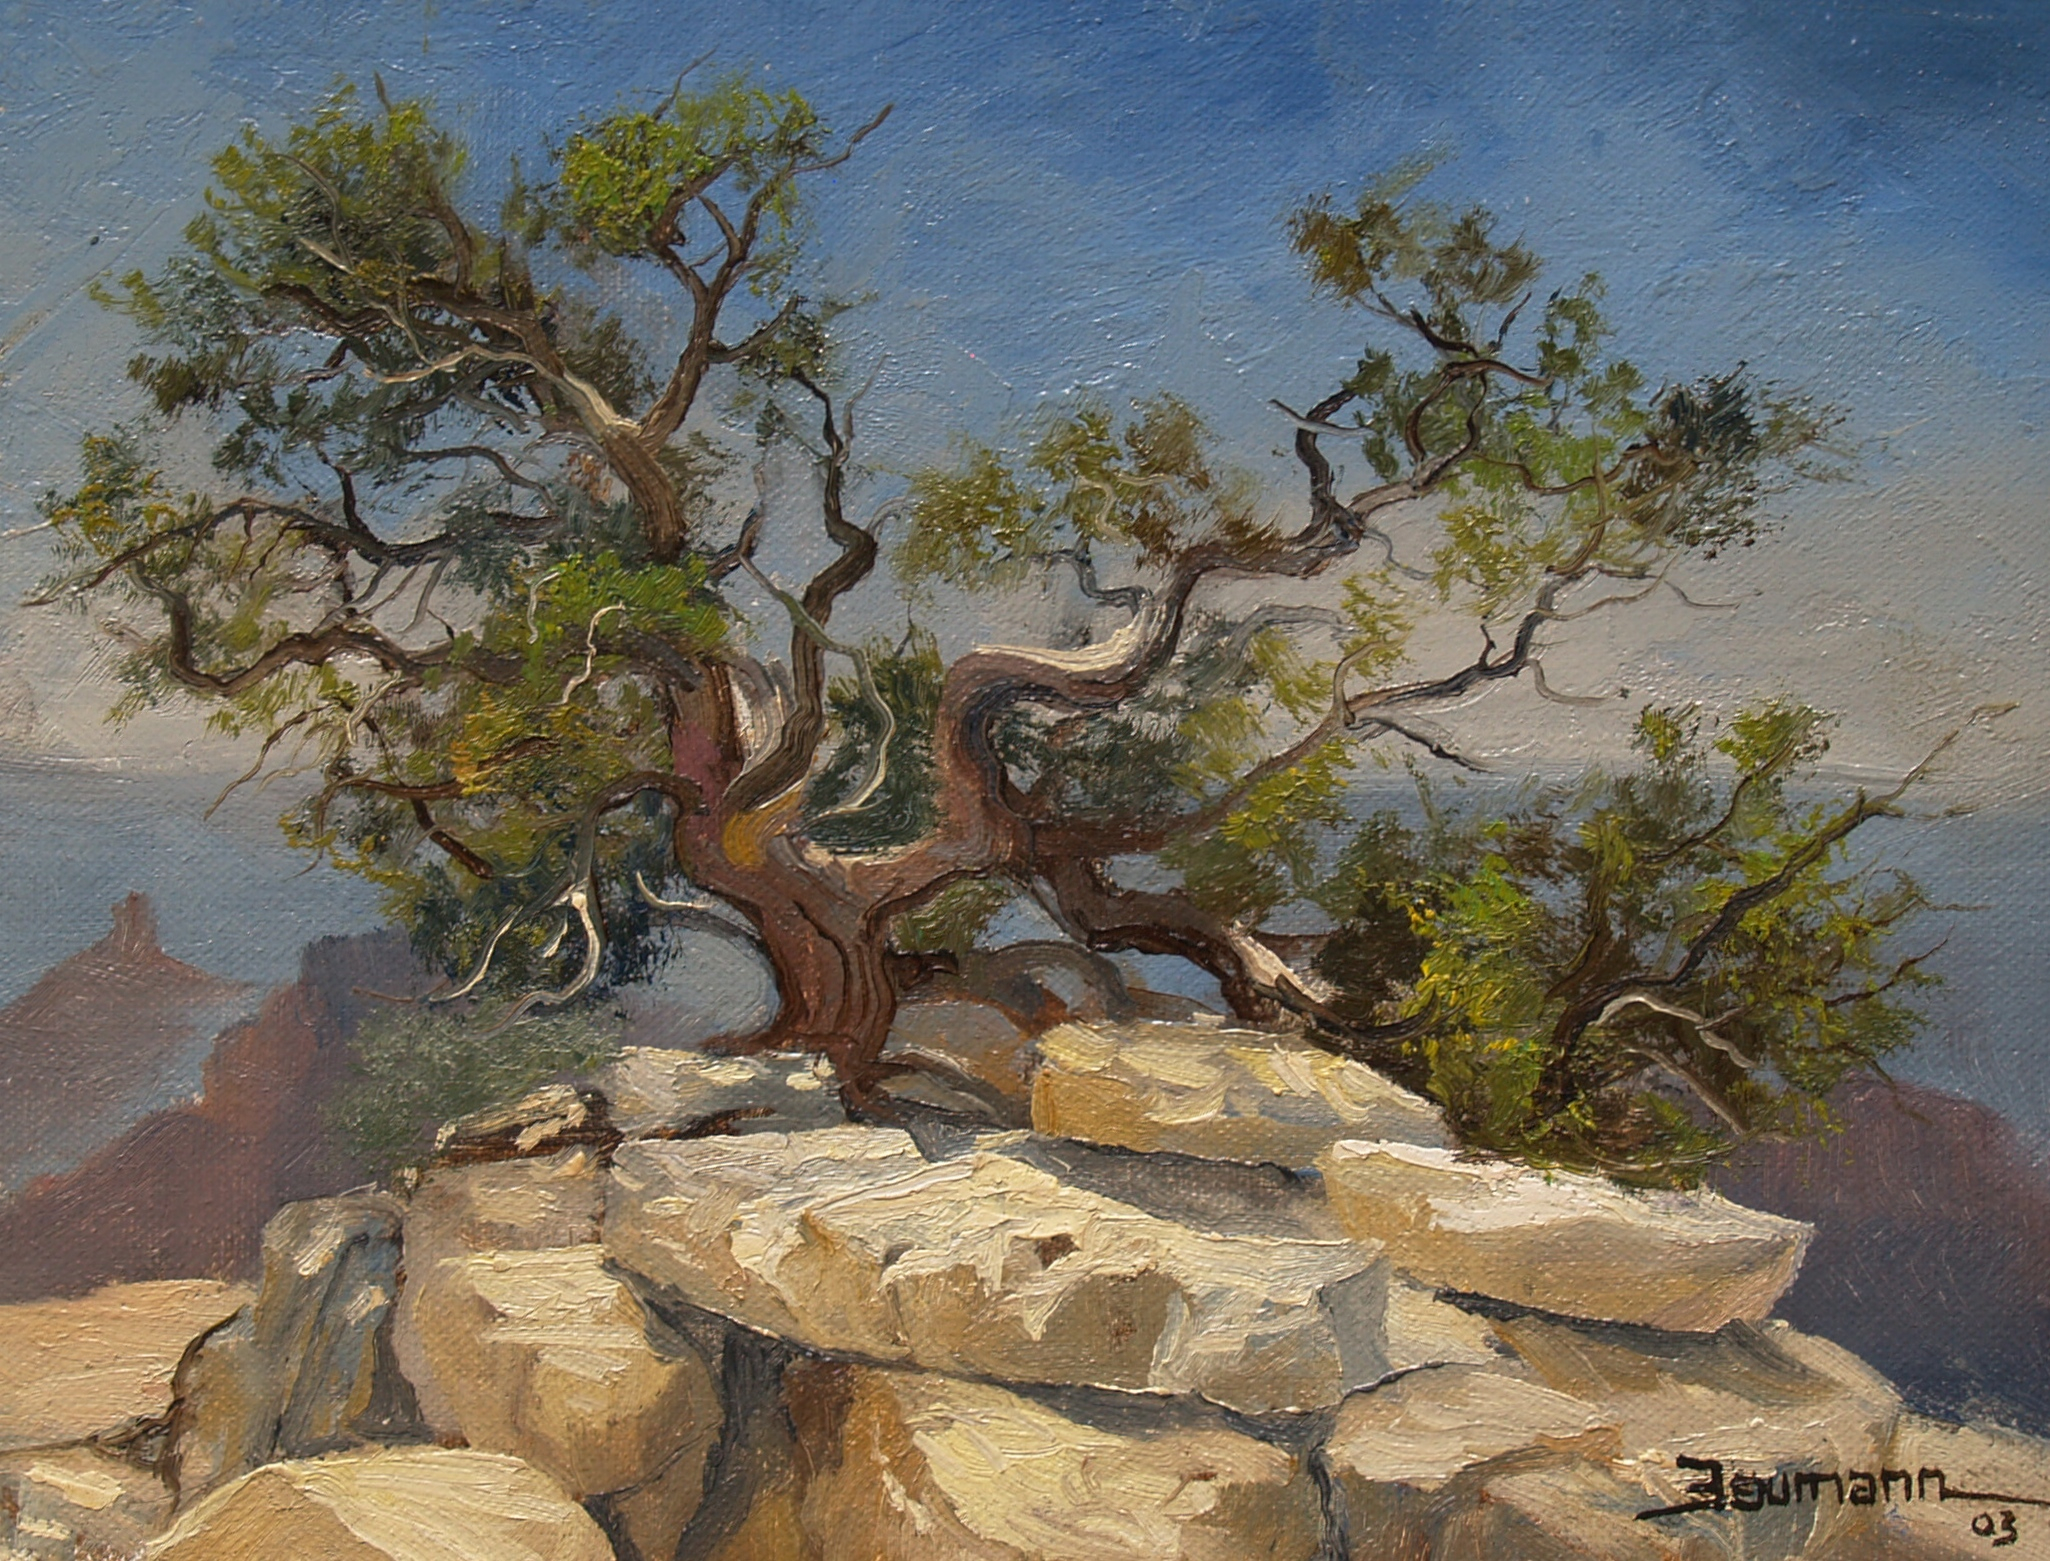 This plein air oil painting called North Rim at Noon by Stefan Baumann features a lone Joshua tree in the Grand Canyon National Park.